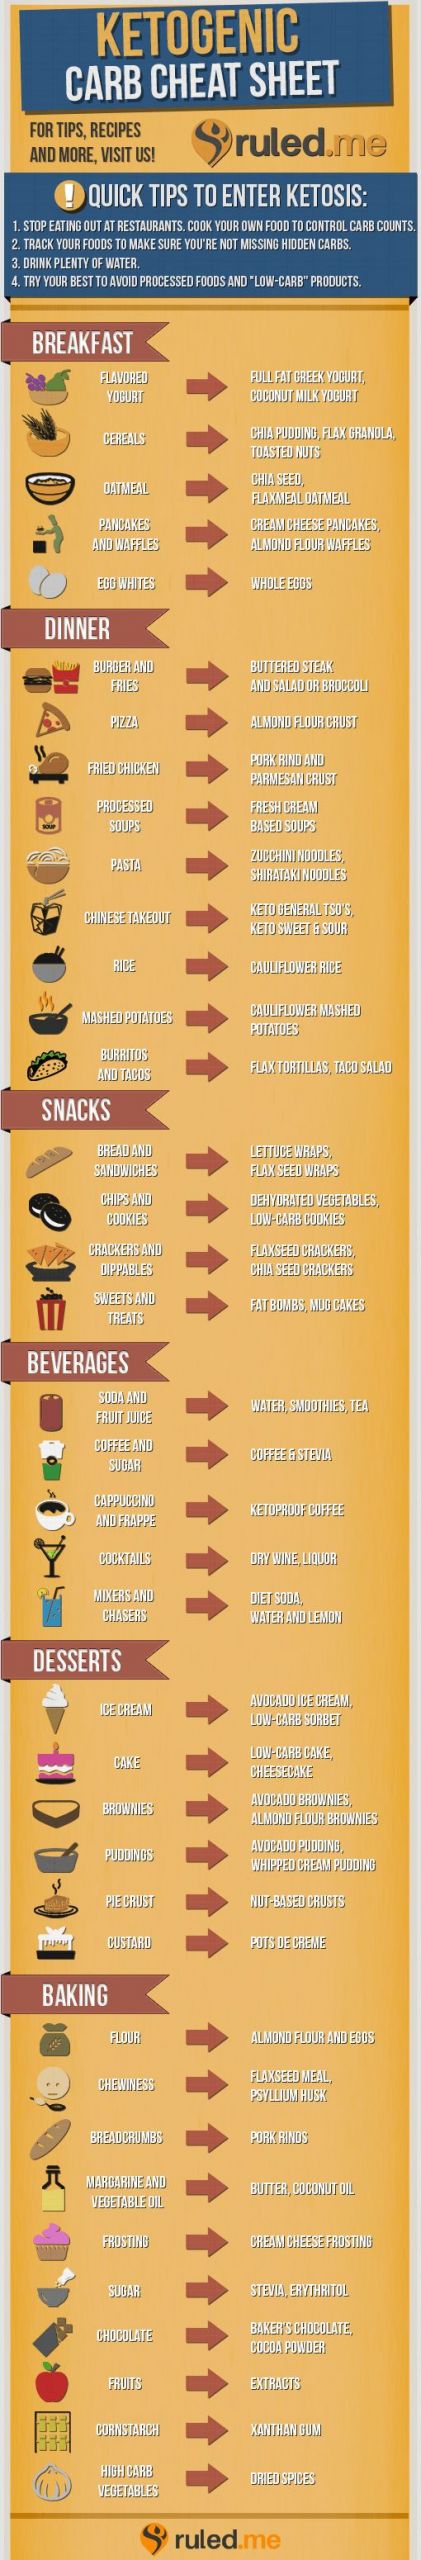 Keto Diet Cheat Sheet
 Health Ketogenic t and Losing weight on Pinterest